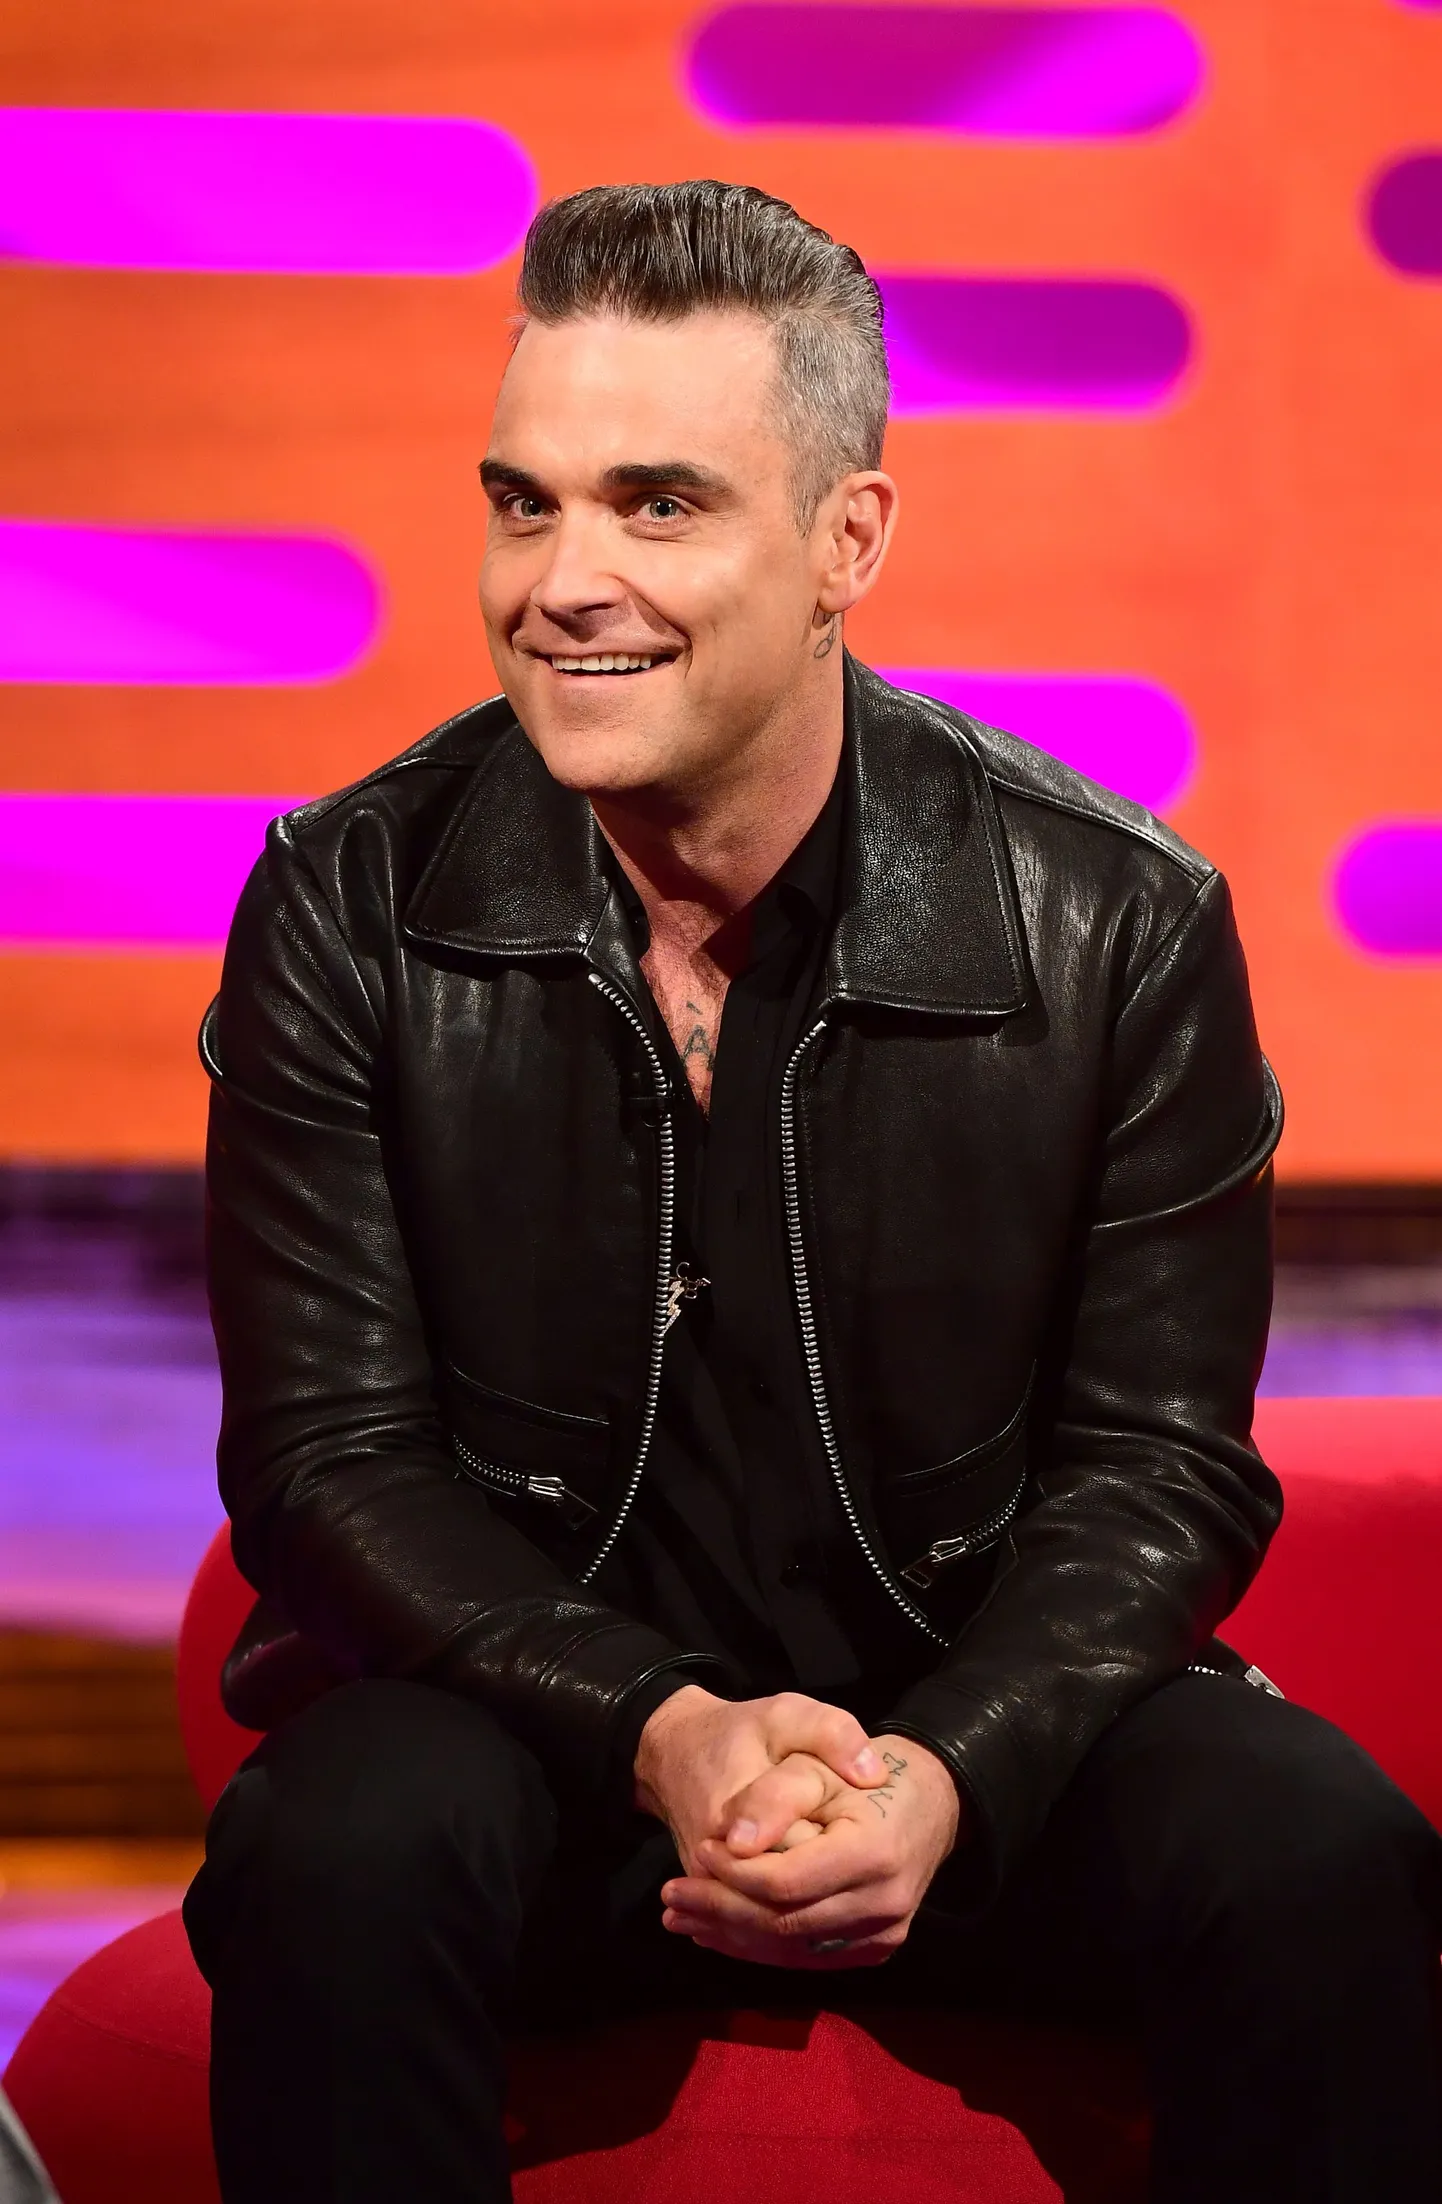 Robbie Williams during filming of The Graham Norton Show at the London Studios in London, to be aired on BBC1 on Friday evening.